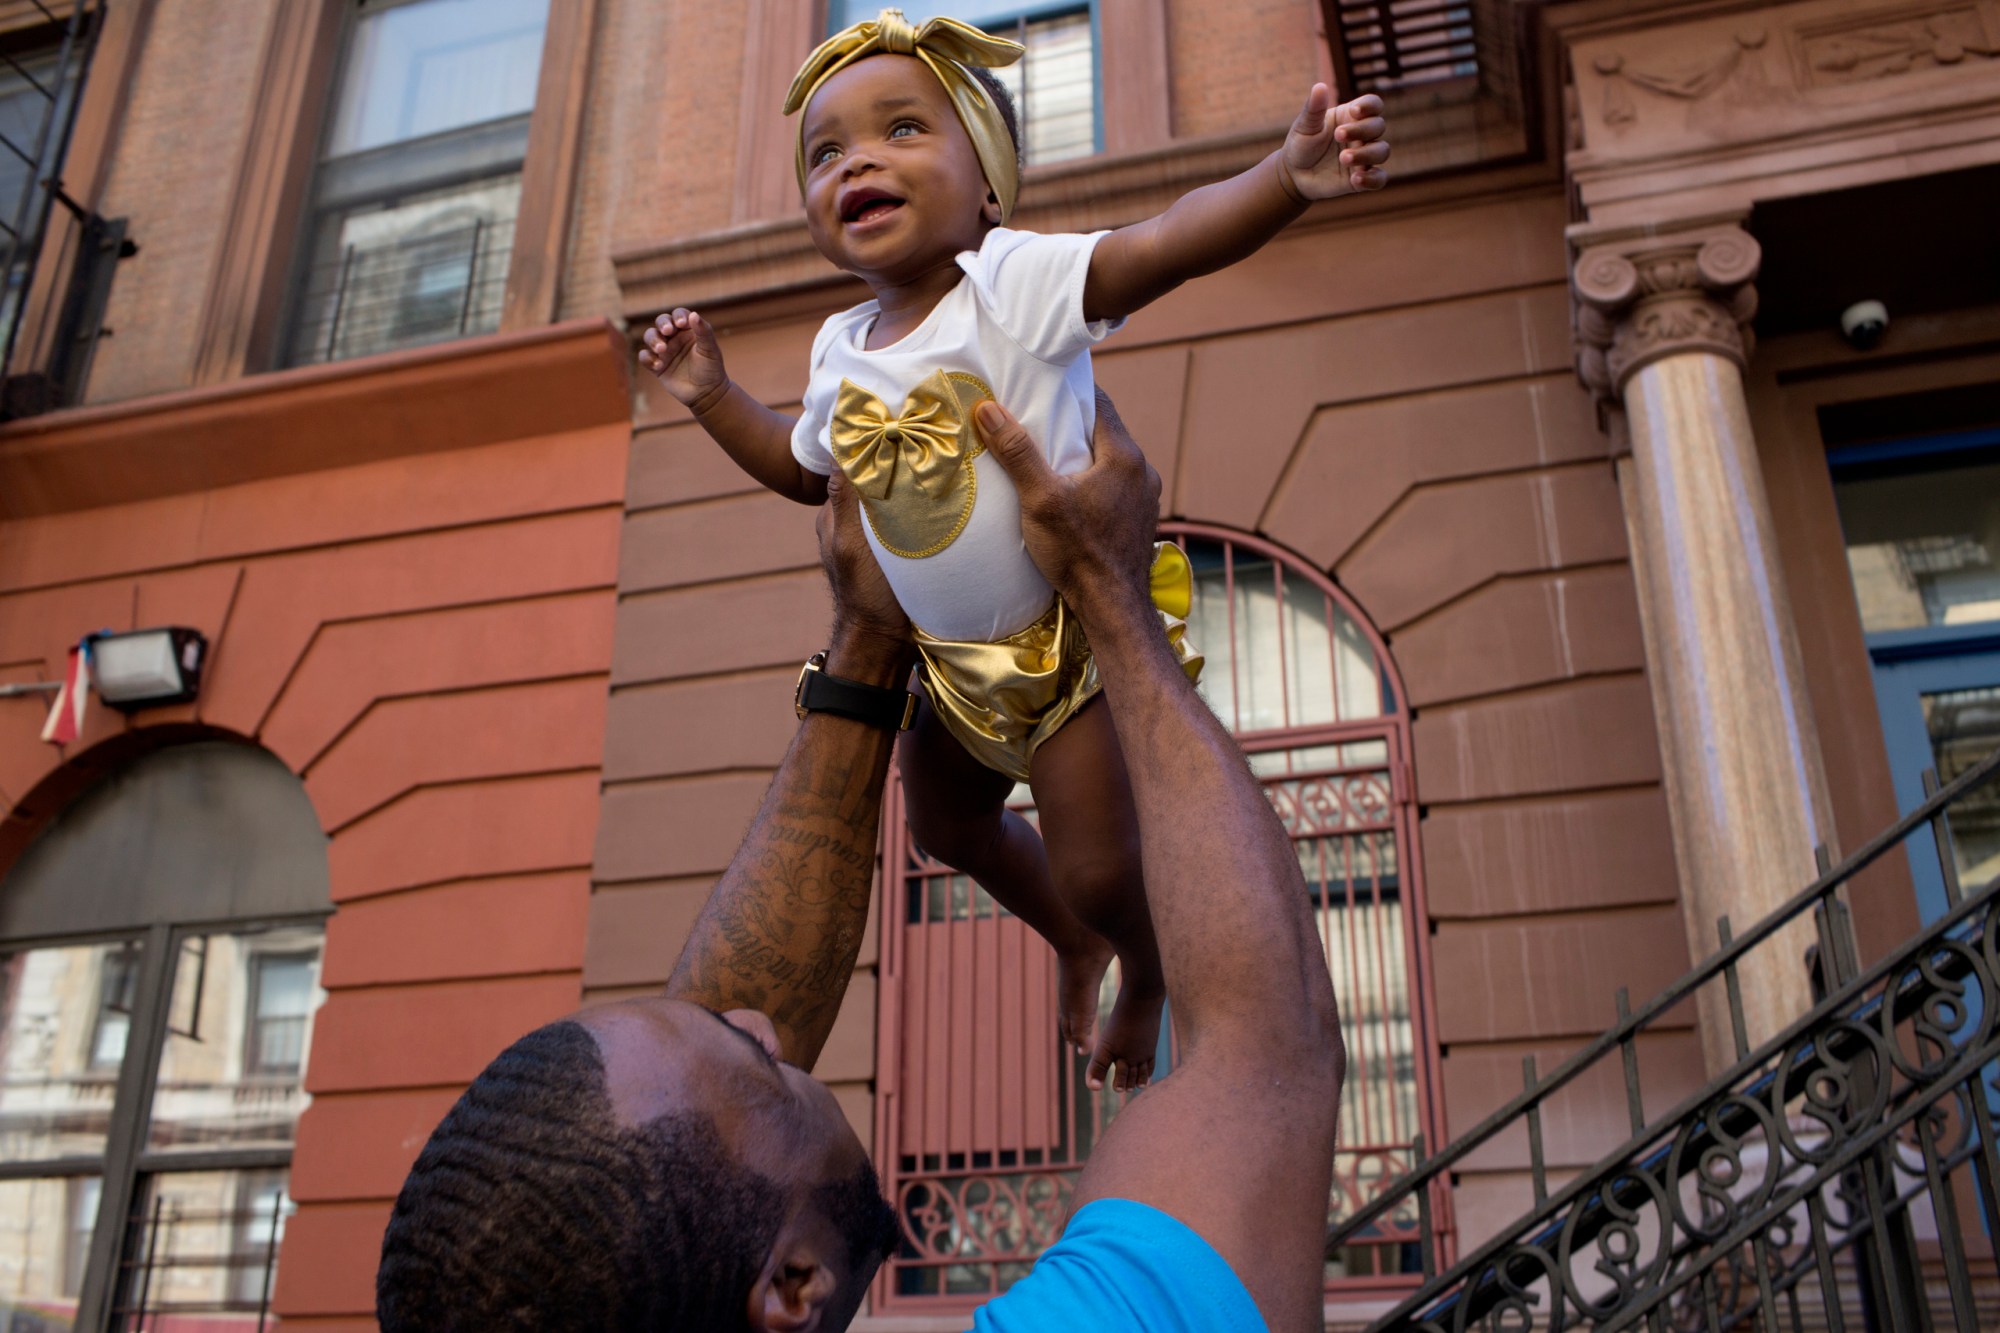 NEW YORK, NY - SEPTEMBER 15: New York City's African American community watches and participates in the 50th anniversary African American Day Parade on September 15, 2019 in the Harlem neighborhood of New York City. (Photo by Andrew Lichtenstein/Corbis via Getty Images)